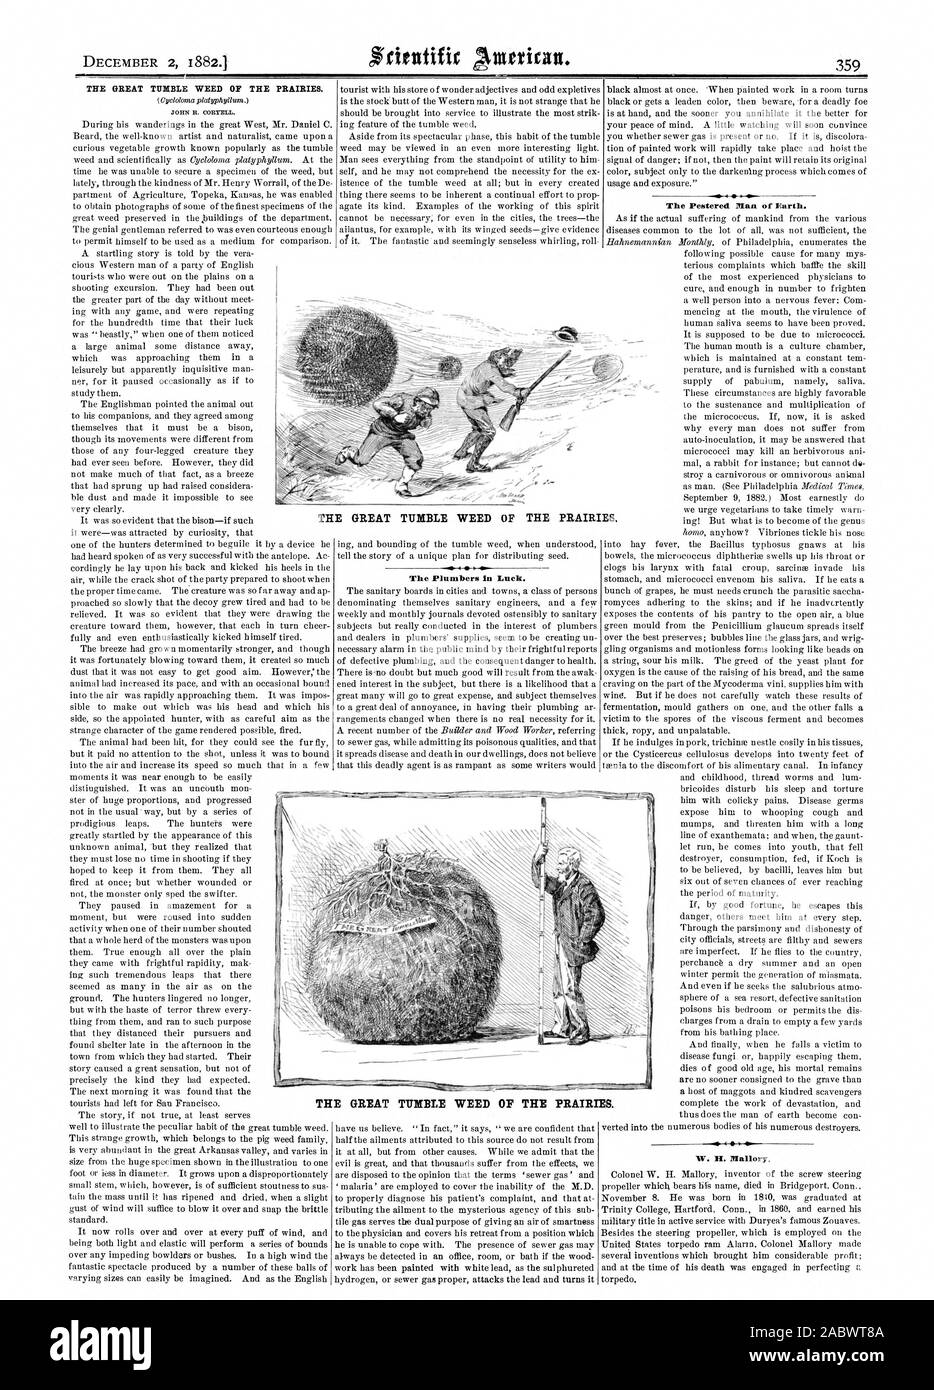 WOW THE GREAT MOLE WEED OF THE PRAIRIES. The Plumbers In Luck. The Pestered Man of Earth. THE GREAT TUMBLE WEED OF THE PRAIRIES. THE GREAT TUMBLE WEED OF THE PRAIRIES., scientific american, 1882-12-02 Stock Photo